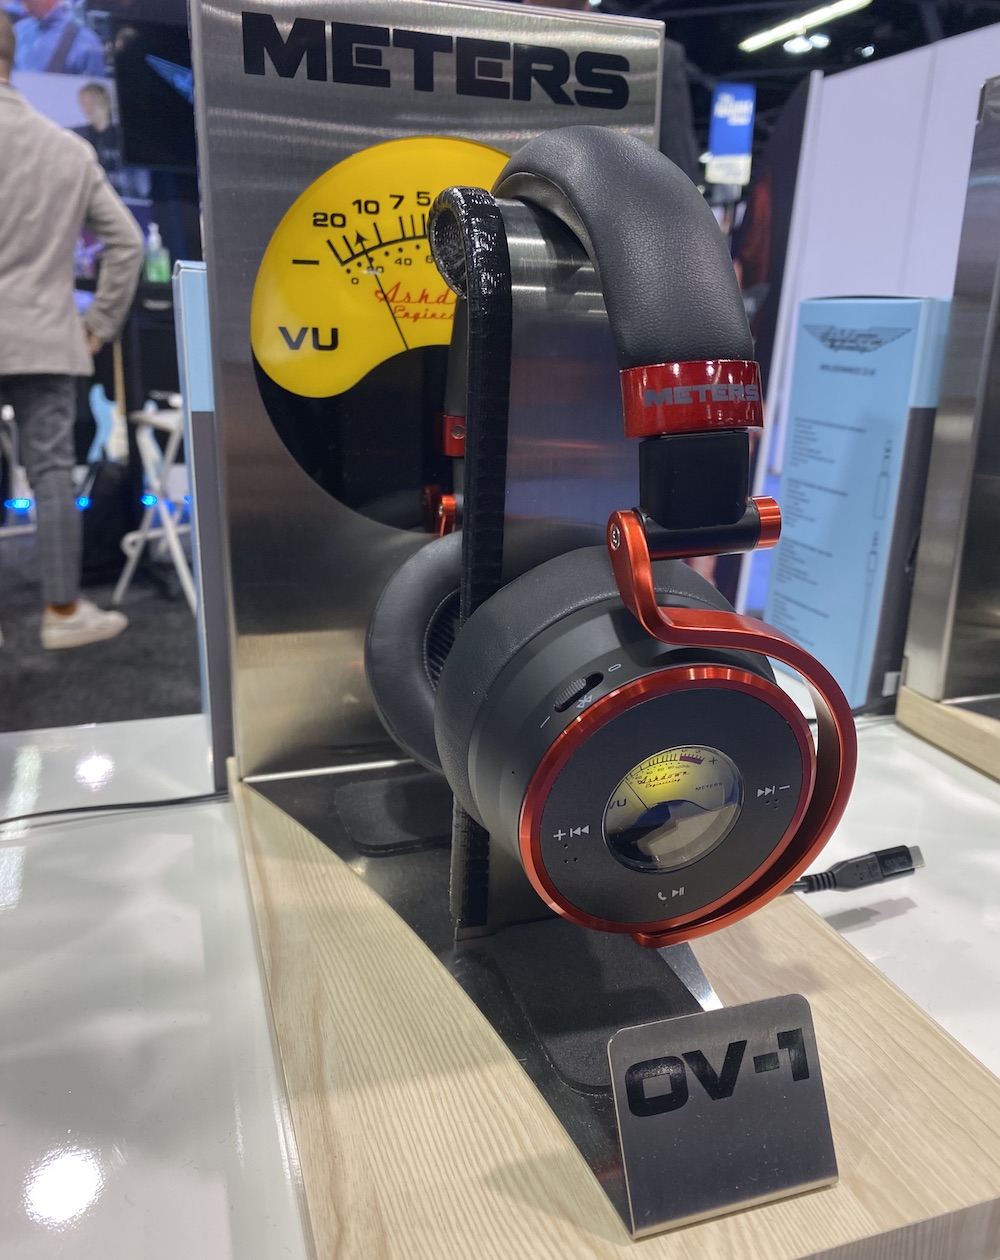 Over in the main halls, Ashdown Engineering's sister company Meters Headphones was showing off a variety of its eye-catching OV-1 headphones, which feature working VU meters in the ear cups.